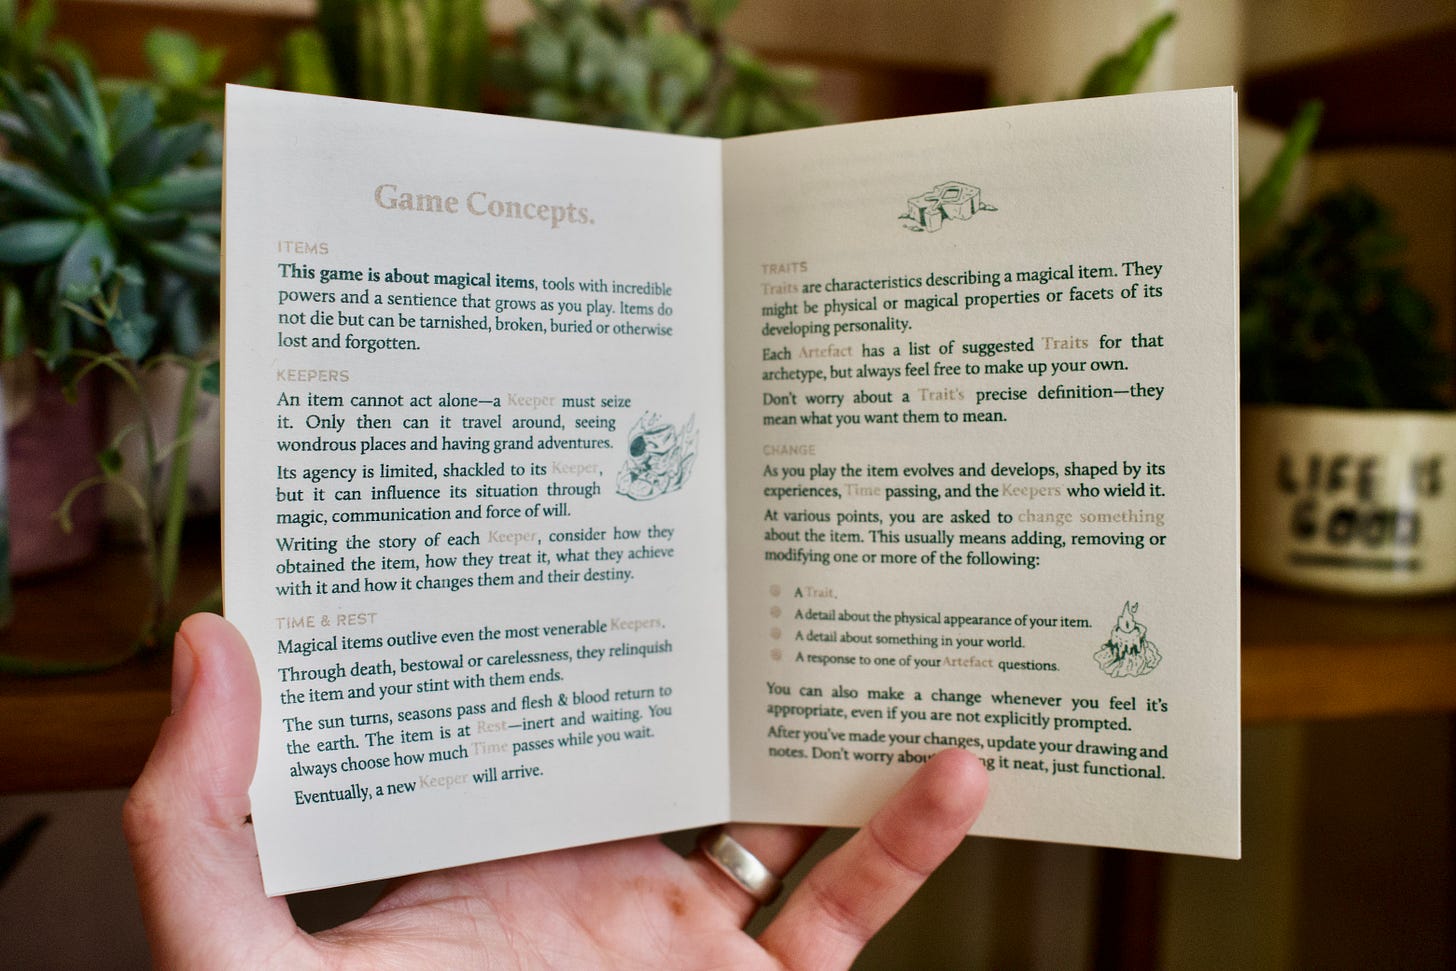 A spread from the Artefact beak zine, showing the 'Game Concepts' pages. The zine is printed on creamy white paper with gold and green ink.